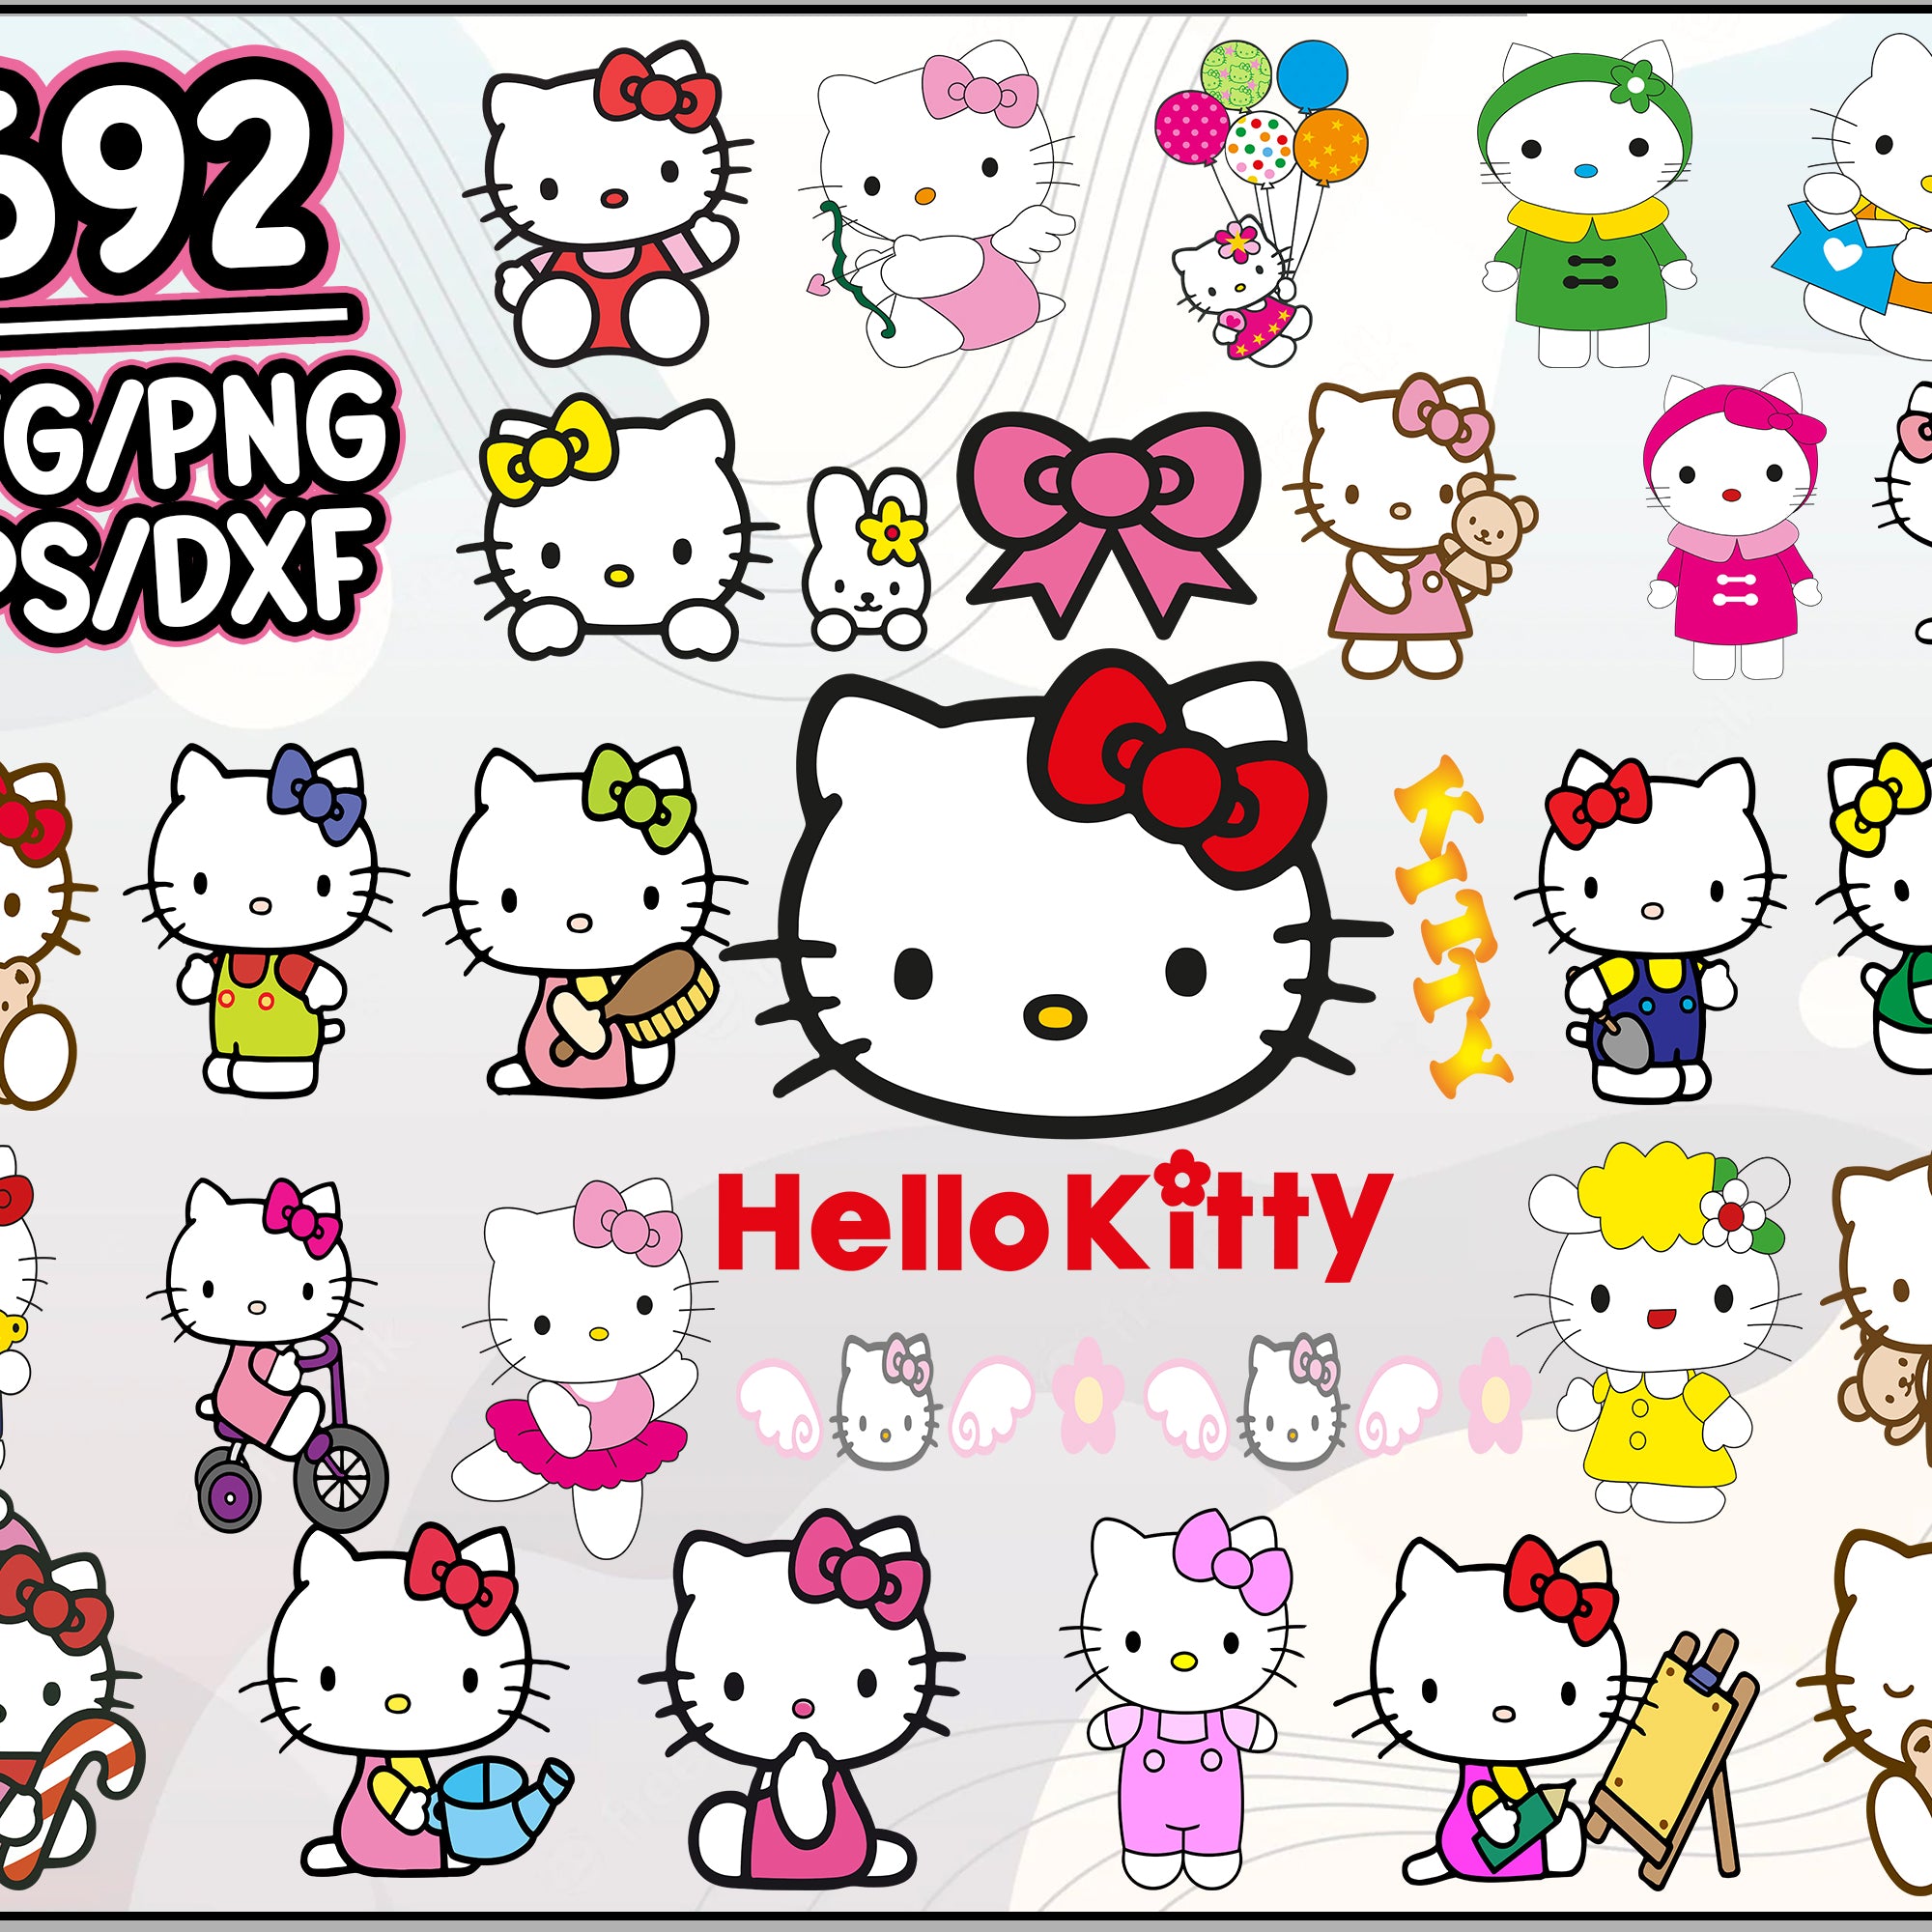 692+ Hello Kitty Svg Bundle, Hello Kitty Svg, Hello Kitty for cricut, Hello Kitty cut file, Hello Kitty png, Hello Kitty dxf, Cartoon svg, png, dxf, eps digital file